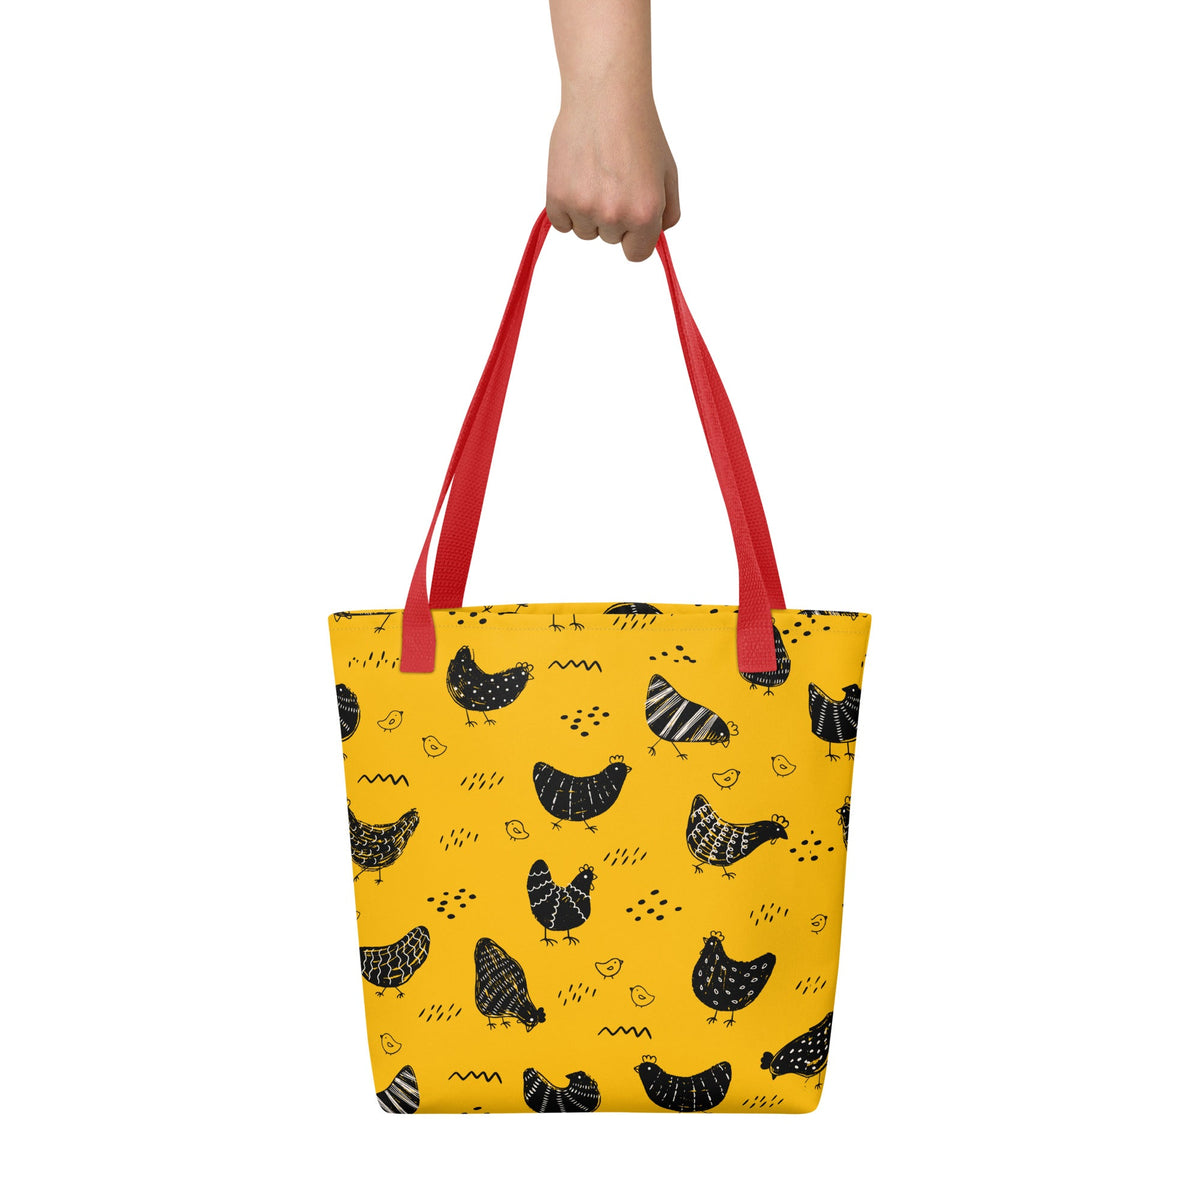 Vintage Yellow Chicken Tote Bag - Cluck It All Farms